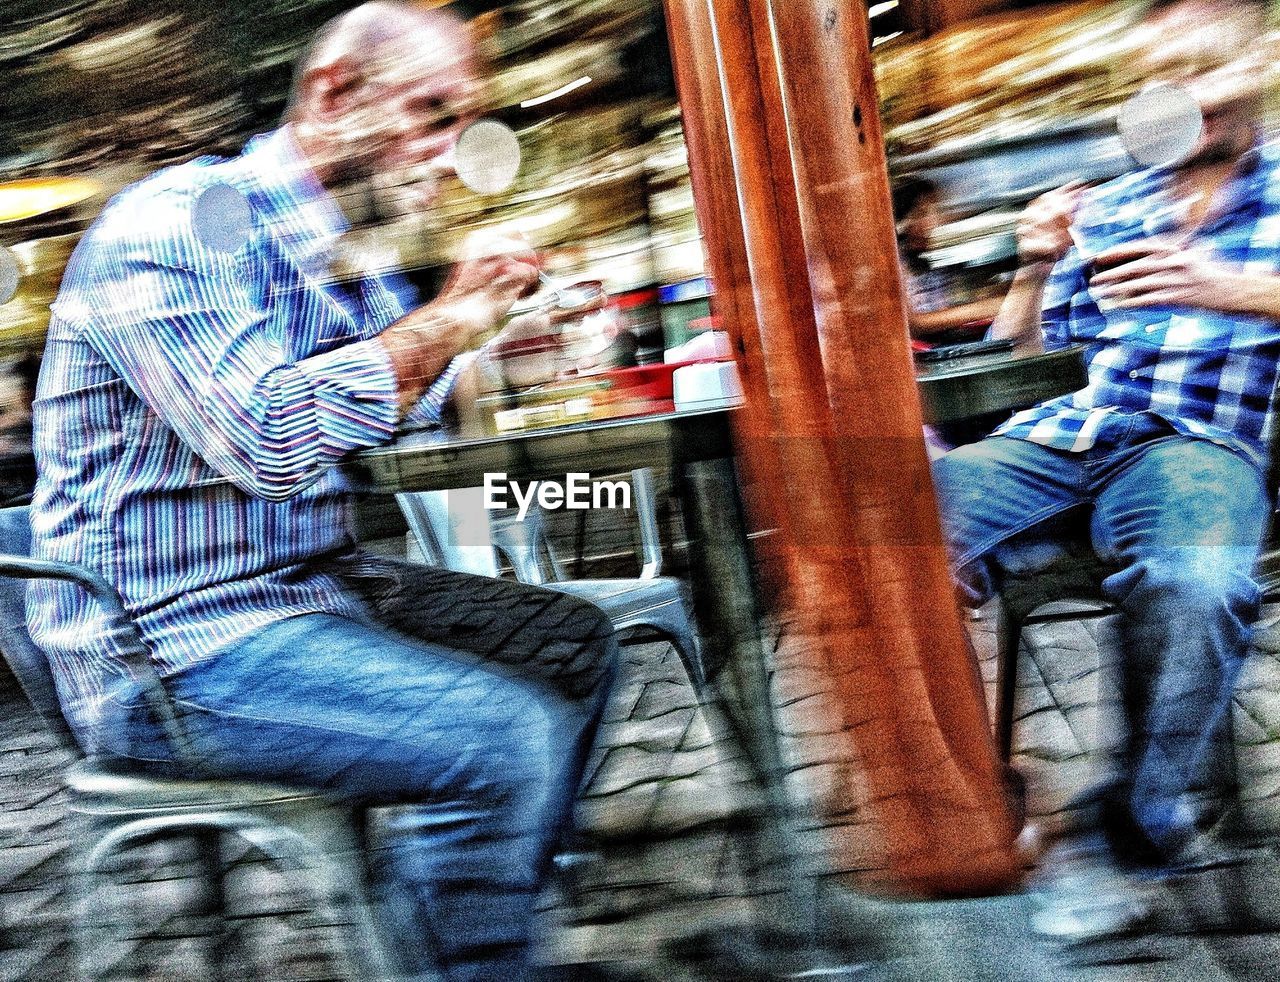 blurred motion, real people, casual clothing, public transportation, buying, lifestyles, men, retail, consumerism, two people, customer, motion, supermarket, city, day, women, outdoors, carousel, adult, people, adults only